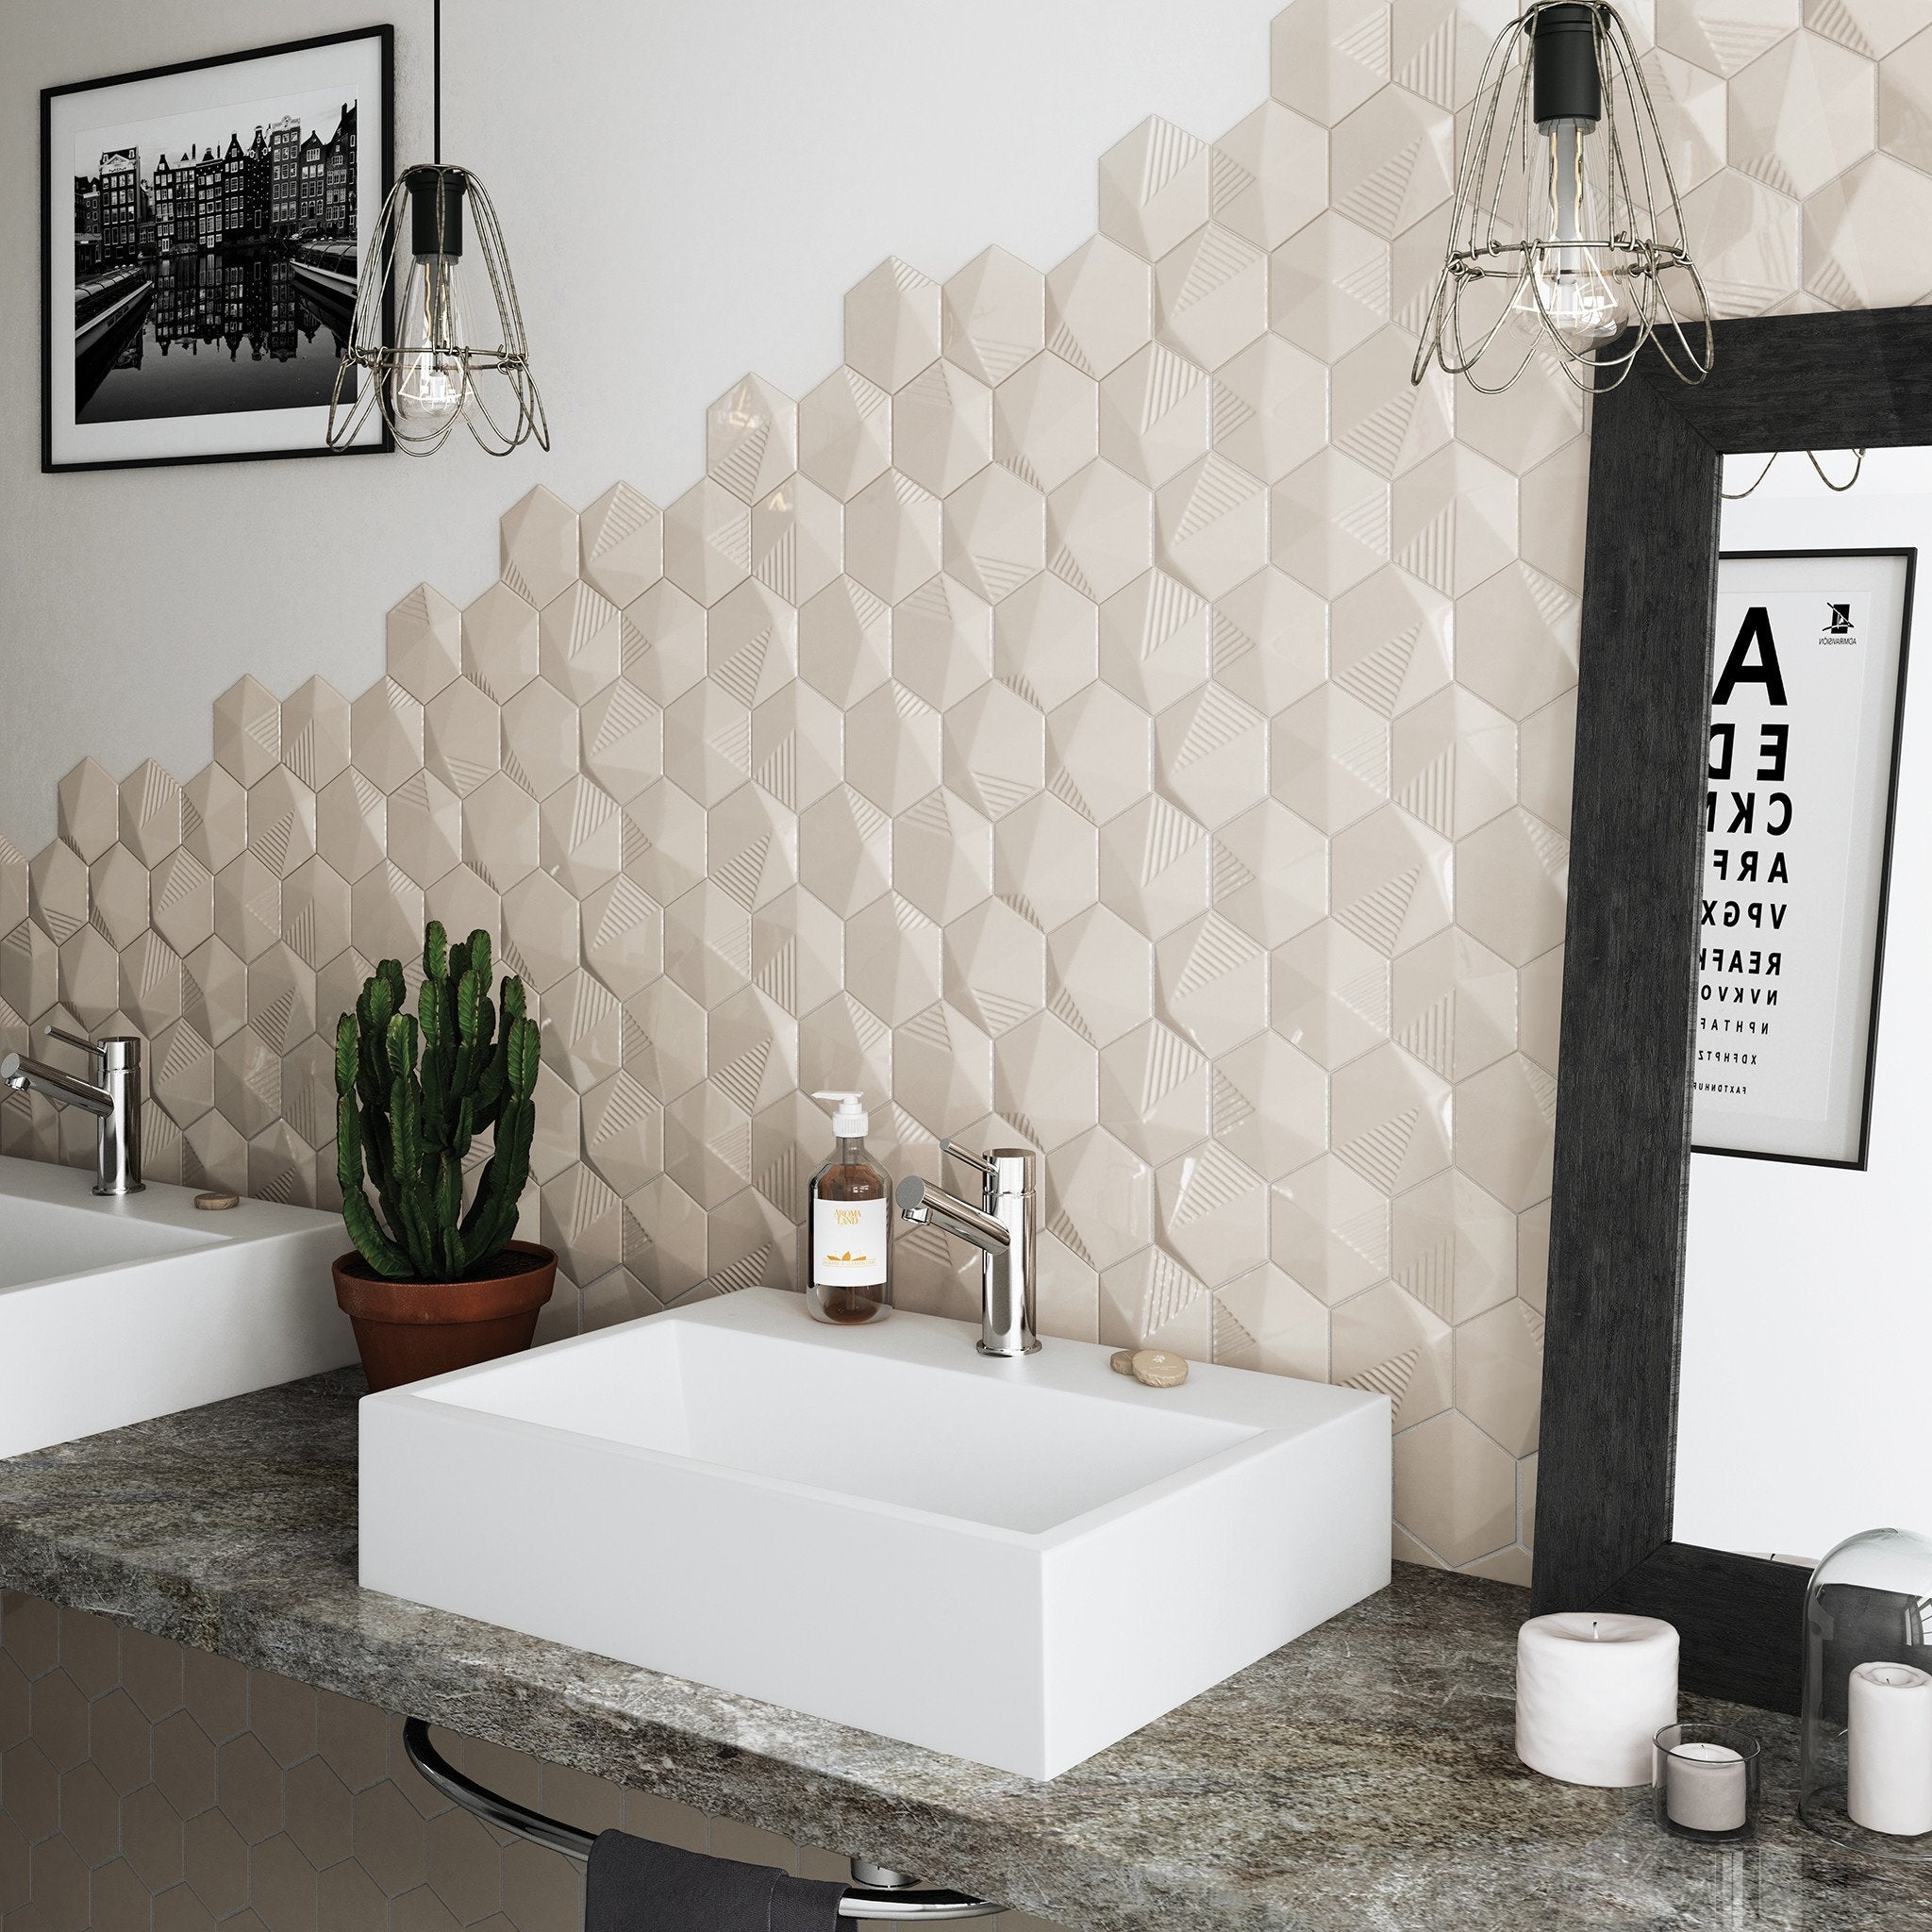 Let's get creative with Hexagon Floor & Wall Tiles, The Baked Tile Co way!